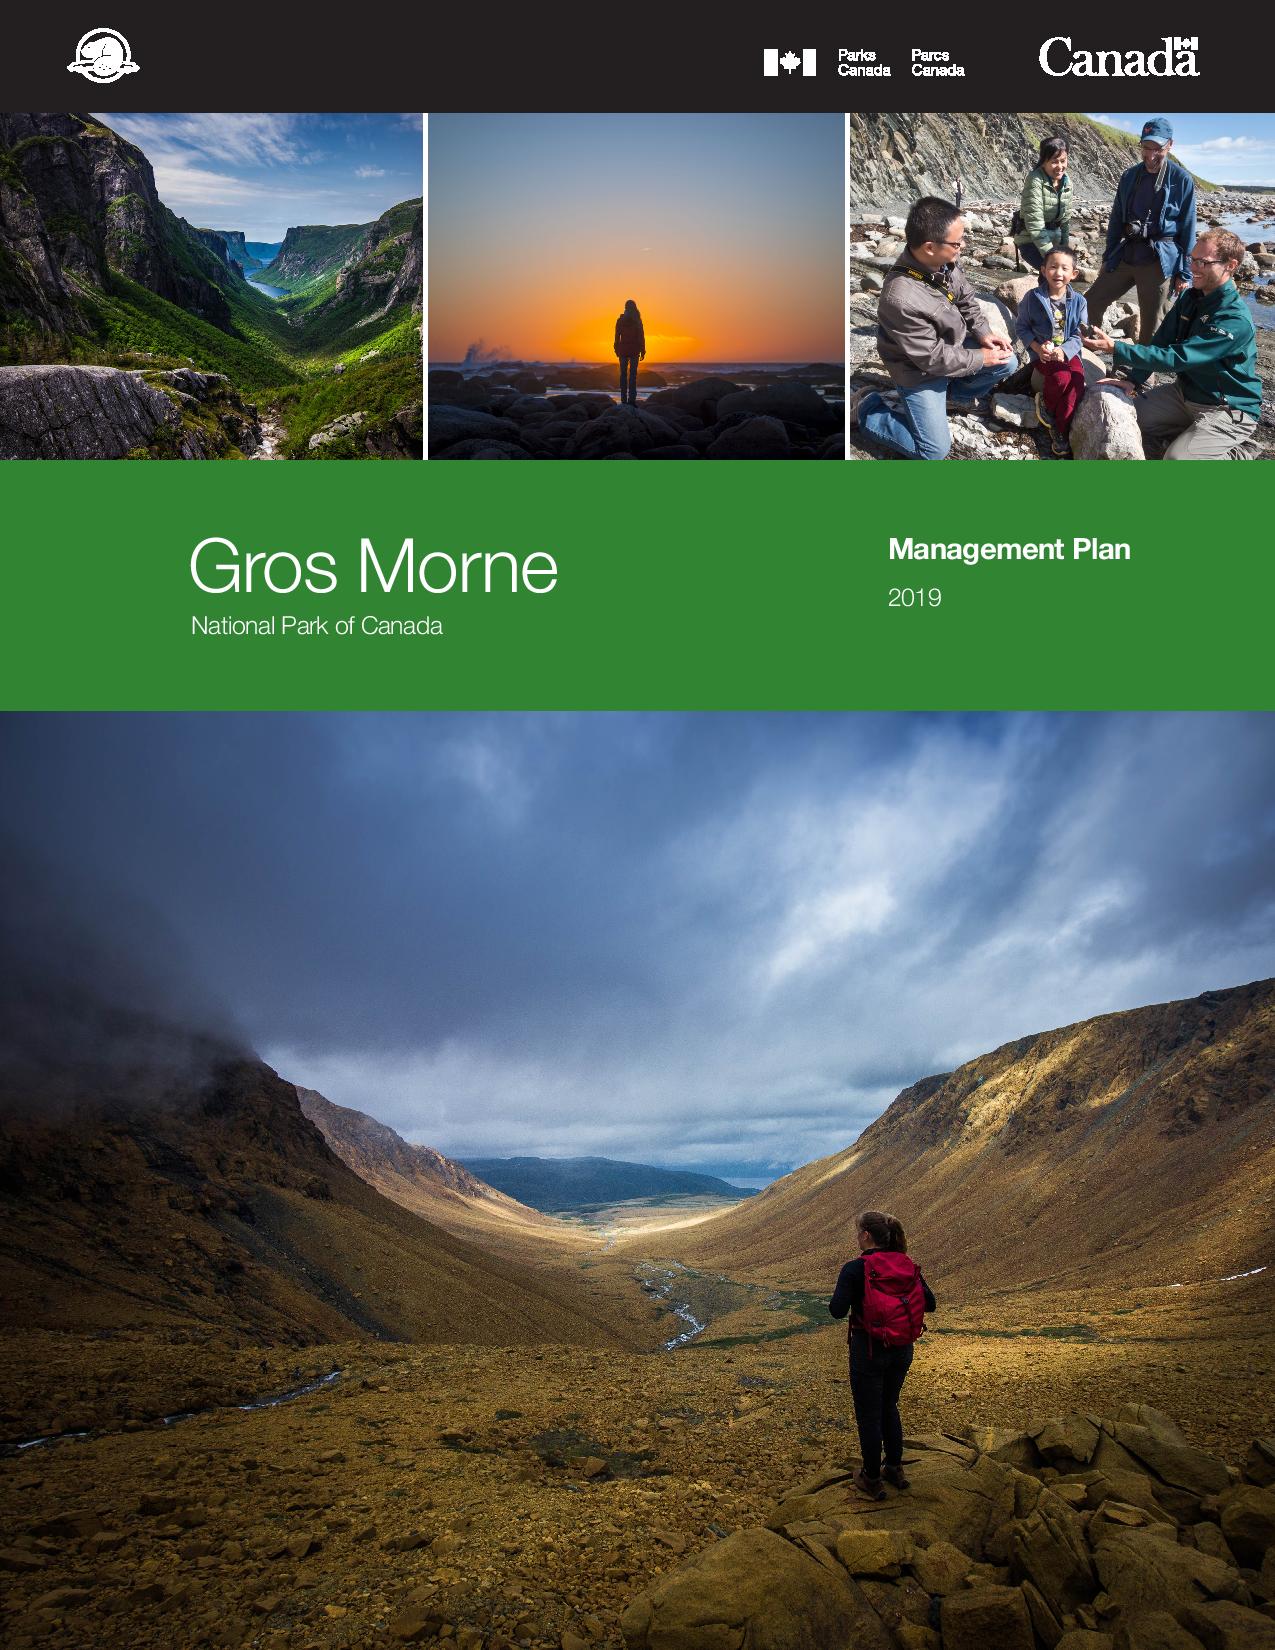 Five images: A valley in Gros Morne National Park. A visitor standing on the shore at sunset. Four visitors and a Parks Canada interpreter on a rocky beach. A visitor overlooking a valley in Gros Morne National Park. A green rectangle with white text that reads: Gros Morne National Park of Canada Management Plan 2019